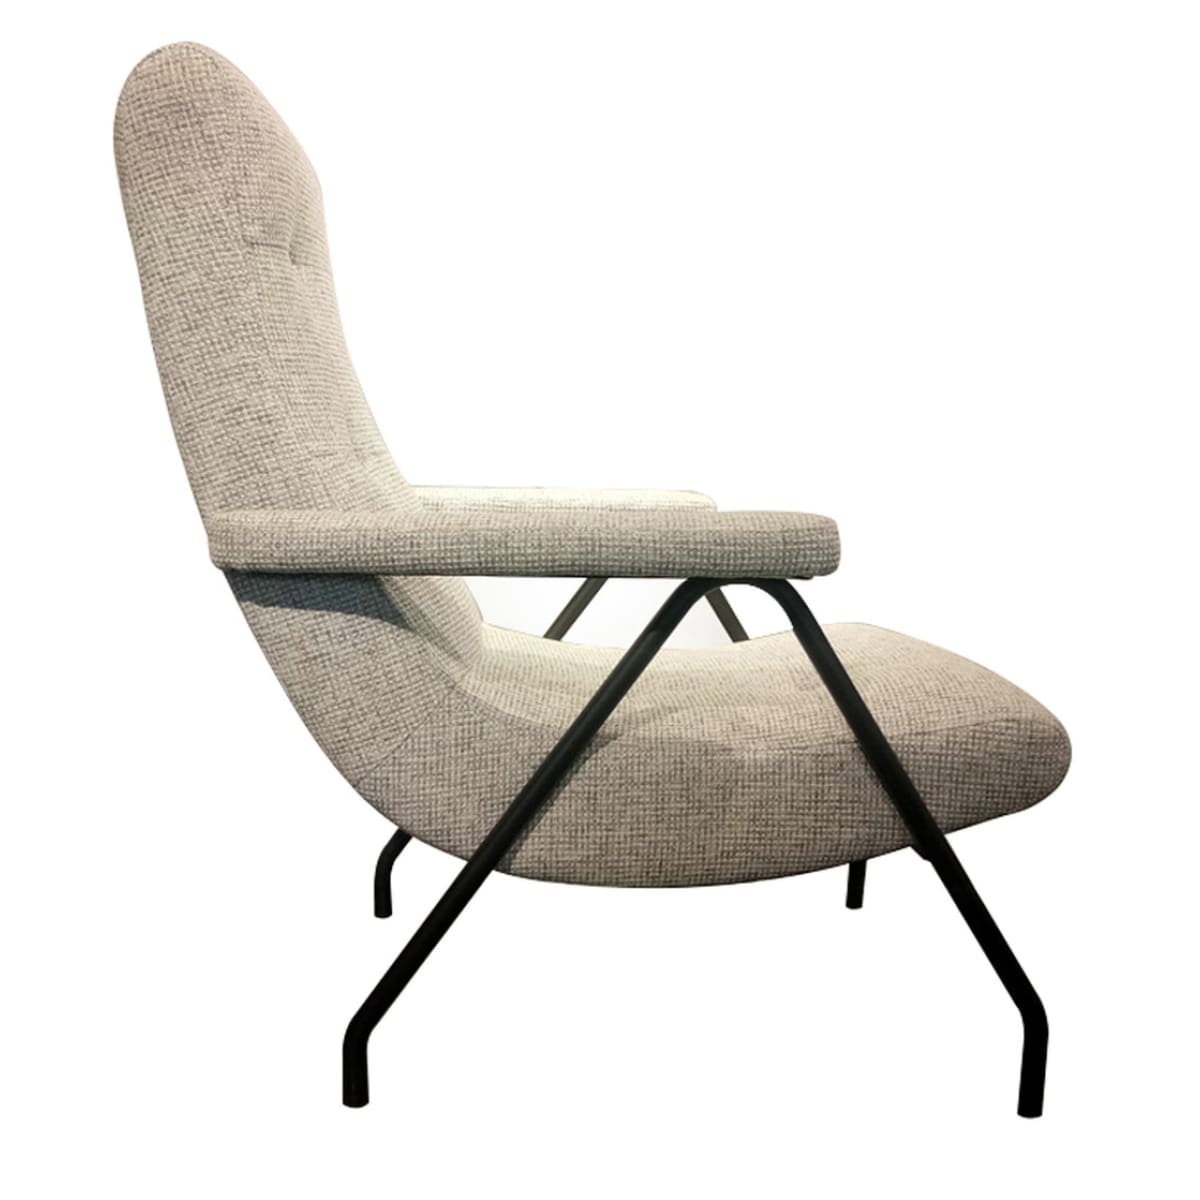 Retro Lounge Chair - Light Grey Tweed - lh-import-accent-club-chairs